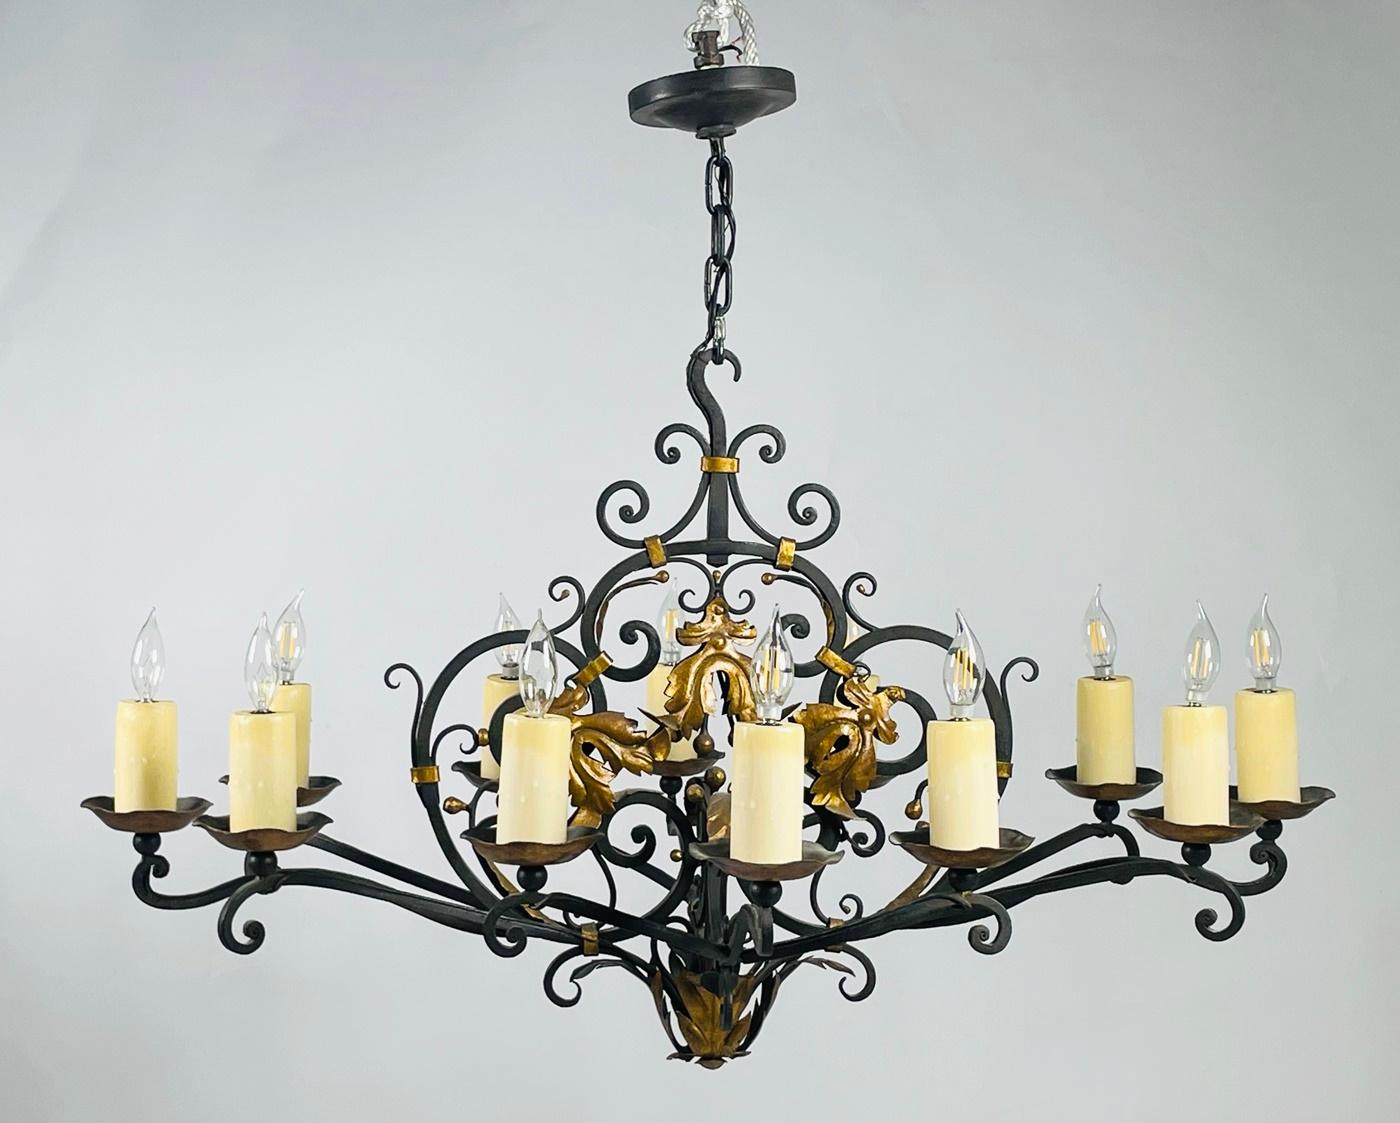 Contemporary Wrought Iron & Gold Gilt Chandelier by Paul Ferrante, USA 2016 For Sale